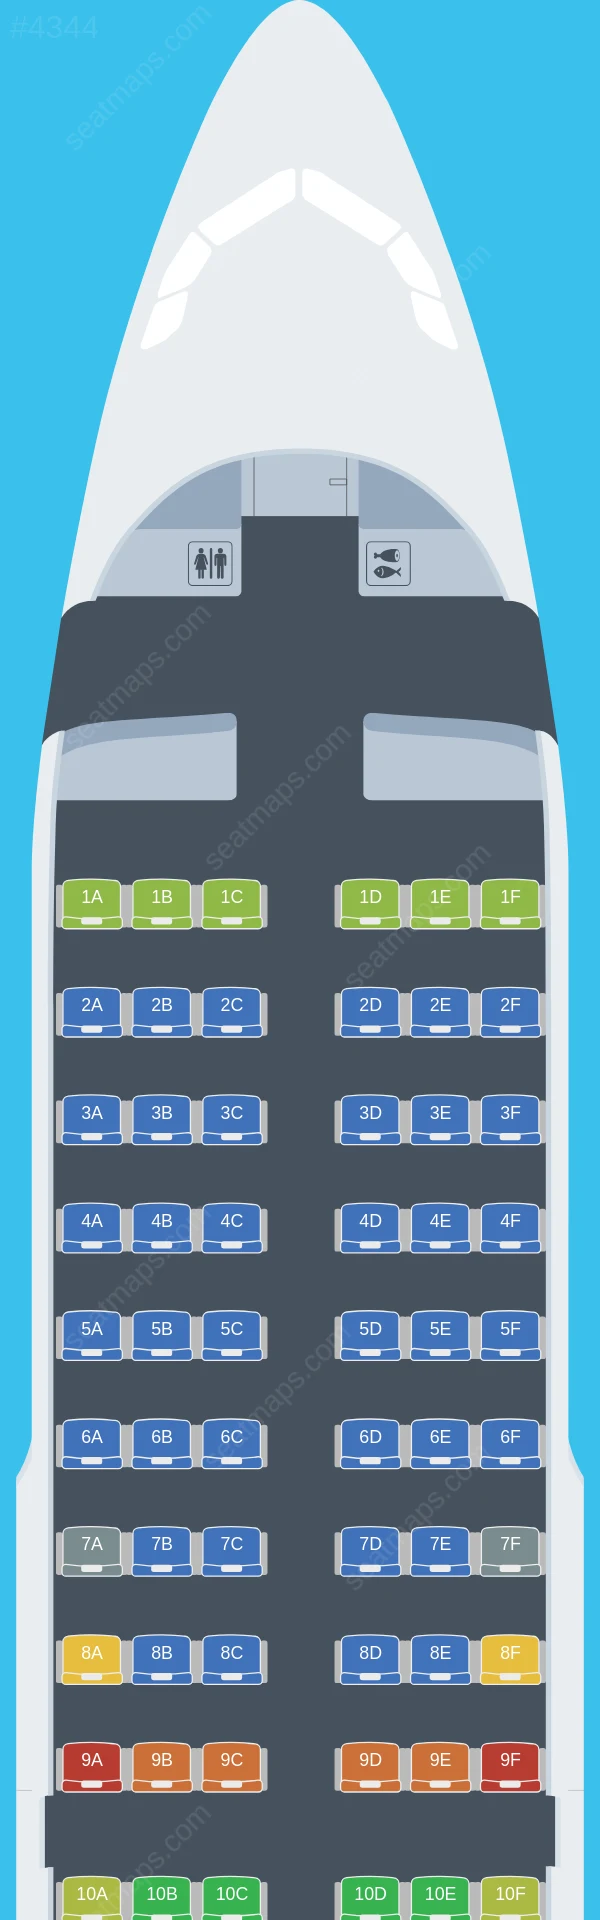 Brussels Airlines Airbus A319-100 seatmap preview